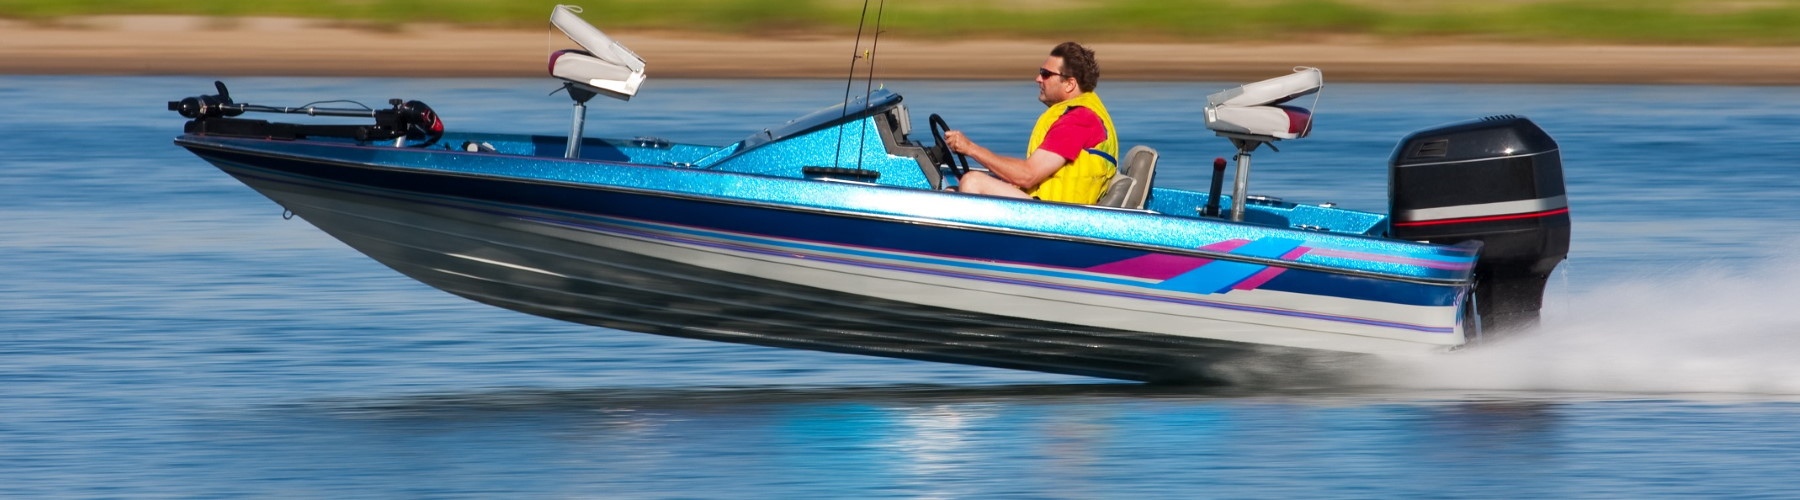 man in speedboat on a lake